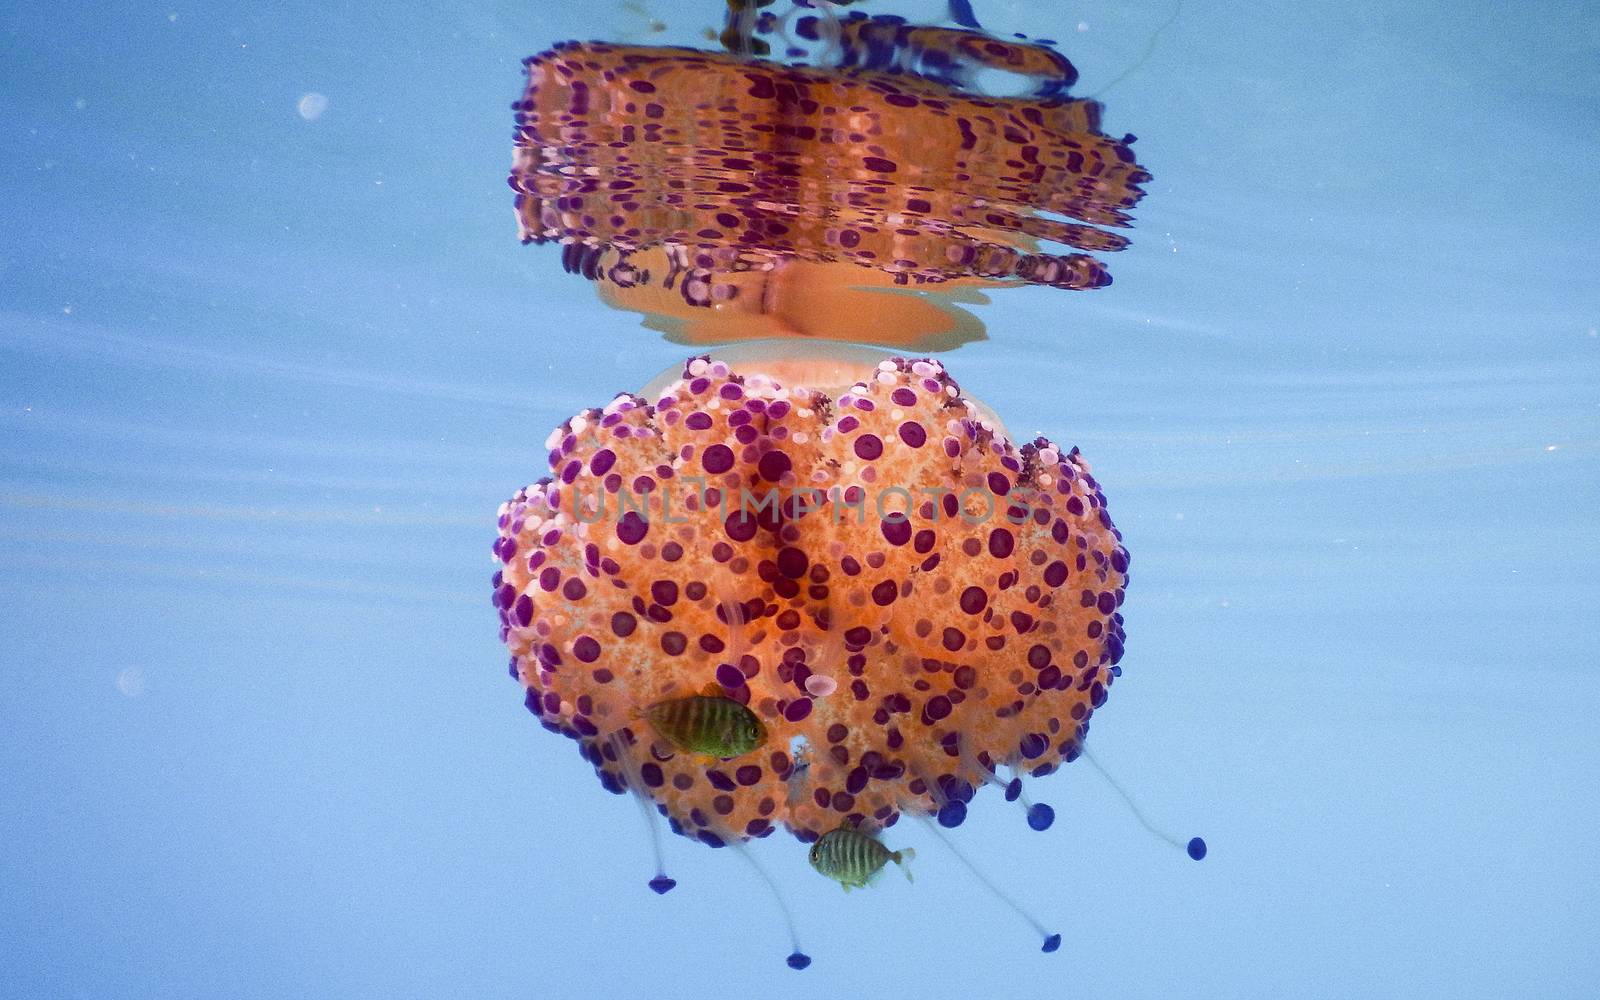 Cotylorhiza tuberculata also known as Mediterranean jelly or Fried Egg jellyfish in Mediterranean Sea, Italy